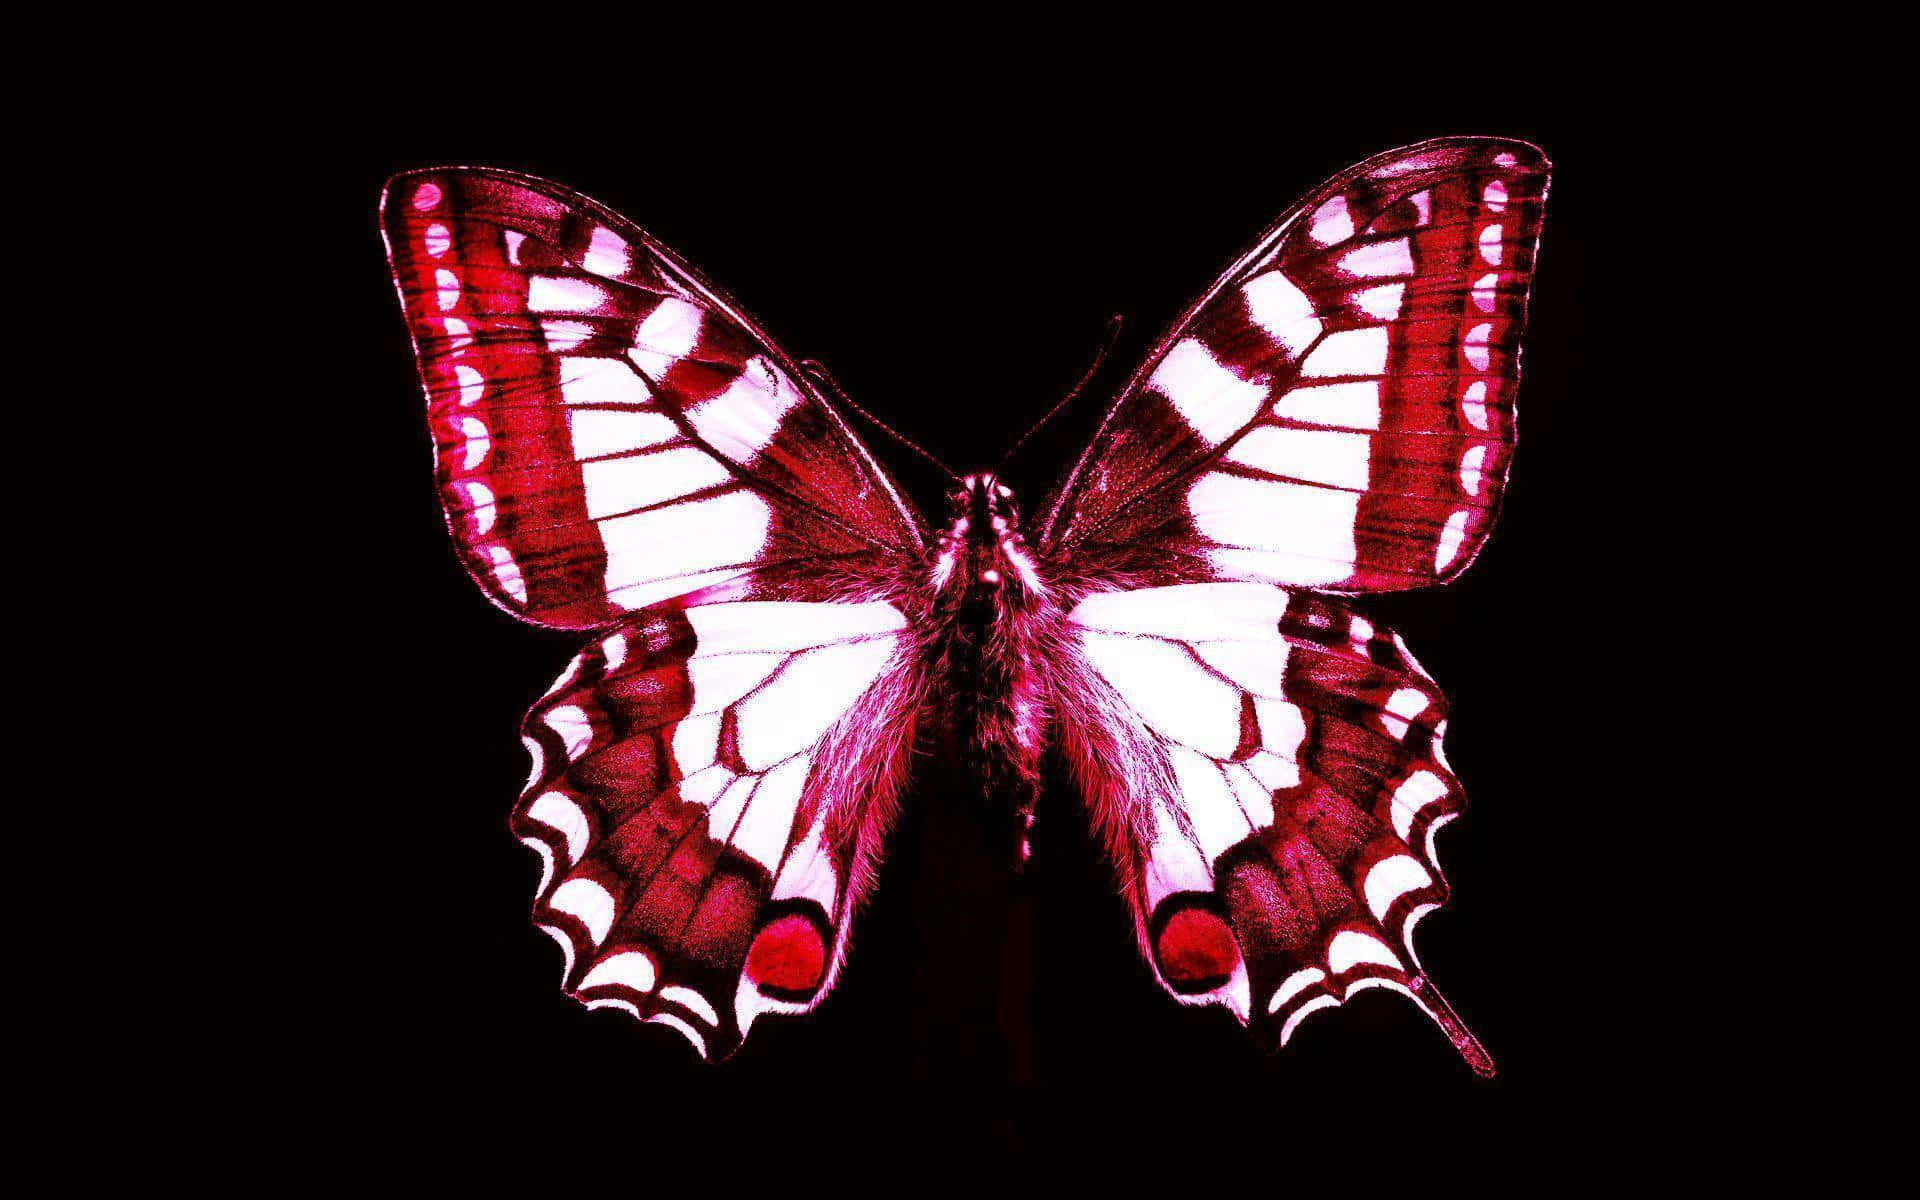 "A bright and beautiful red butterfly." Wallpaper